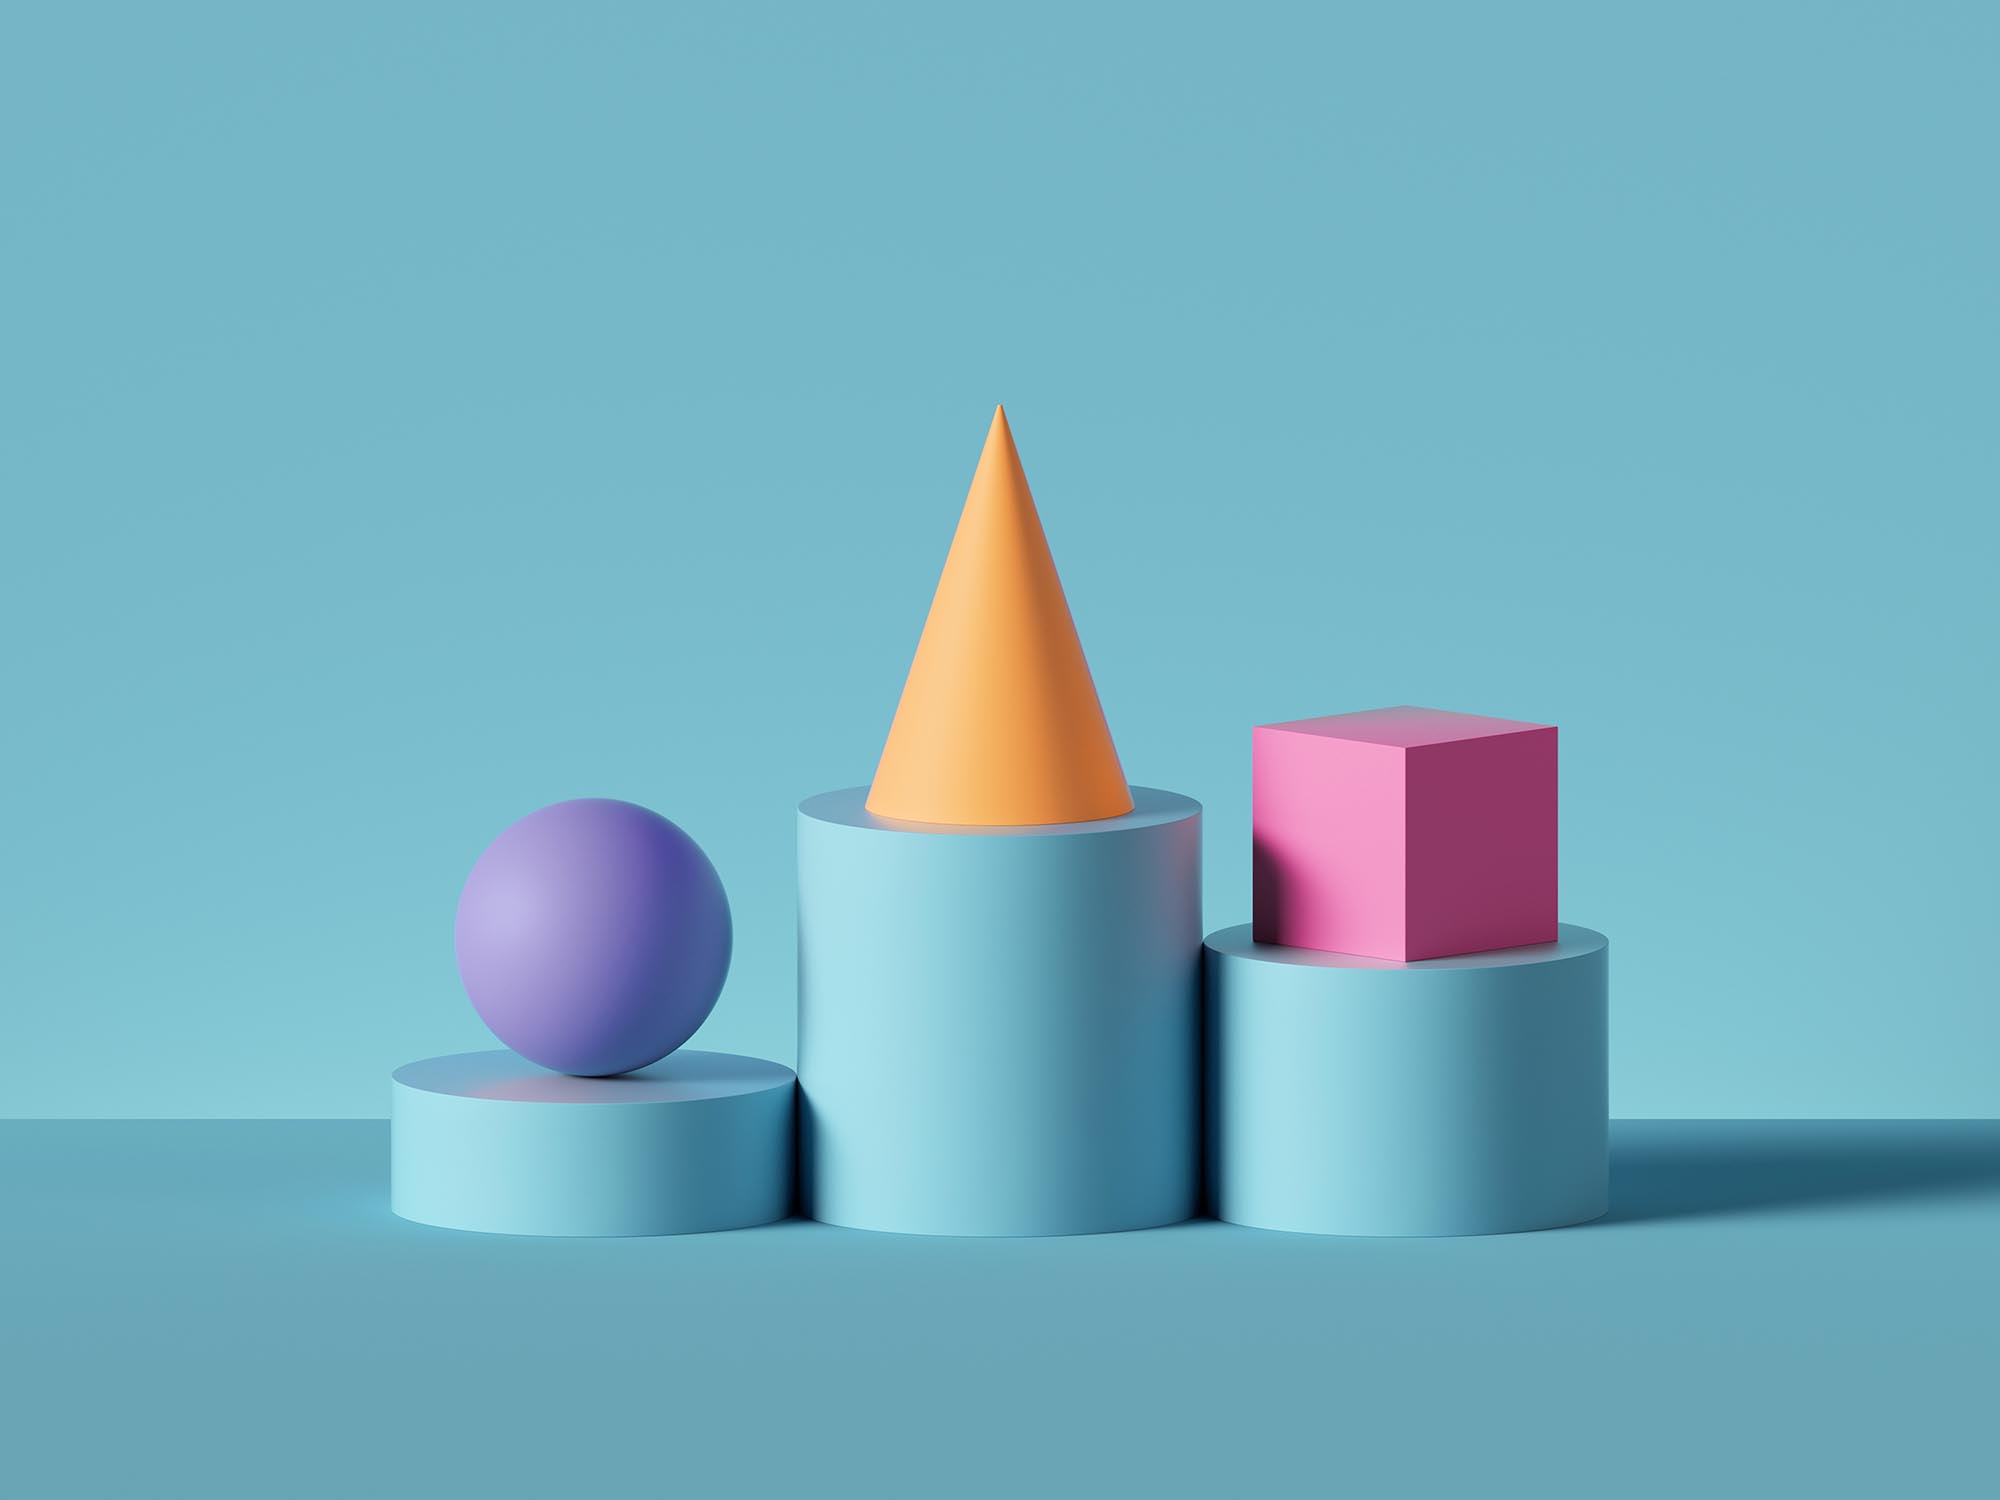 Violet ball, yellow cone, pink cube placed on blue cylinder pedestal steps